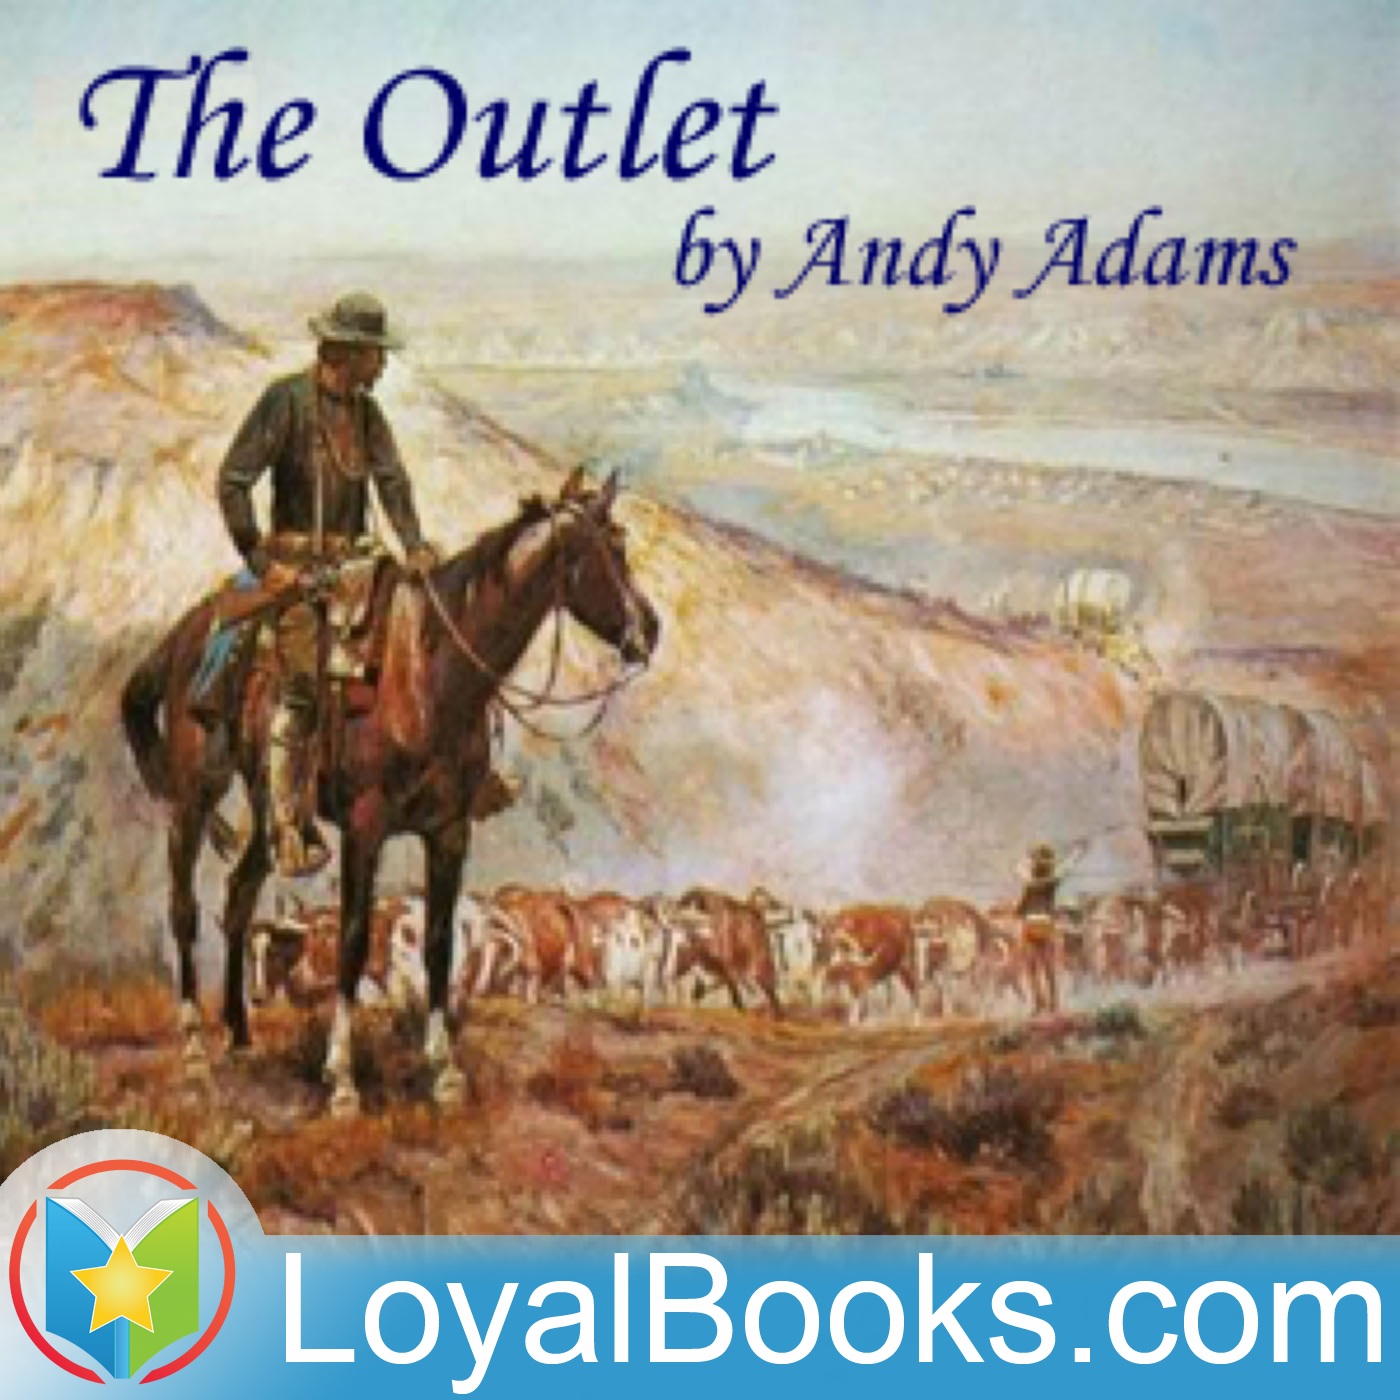 The Outlet by Andy Adams